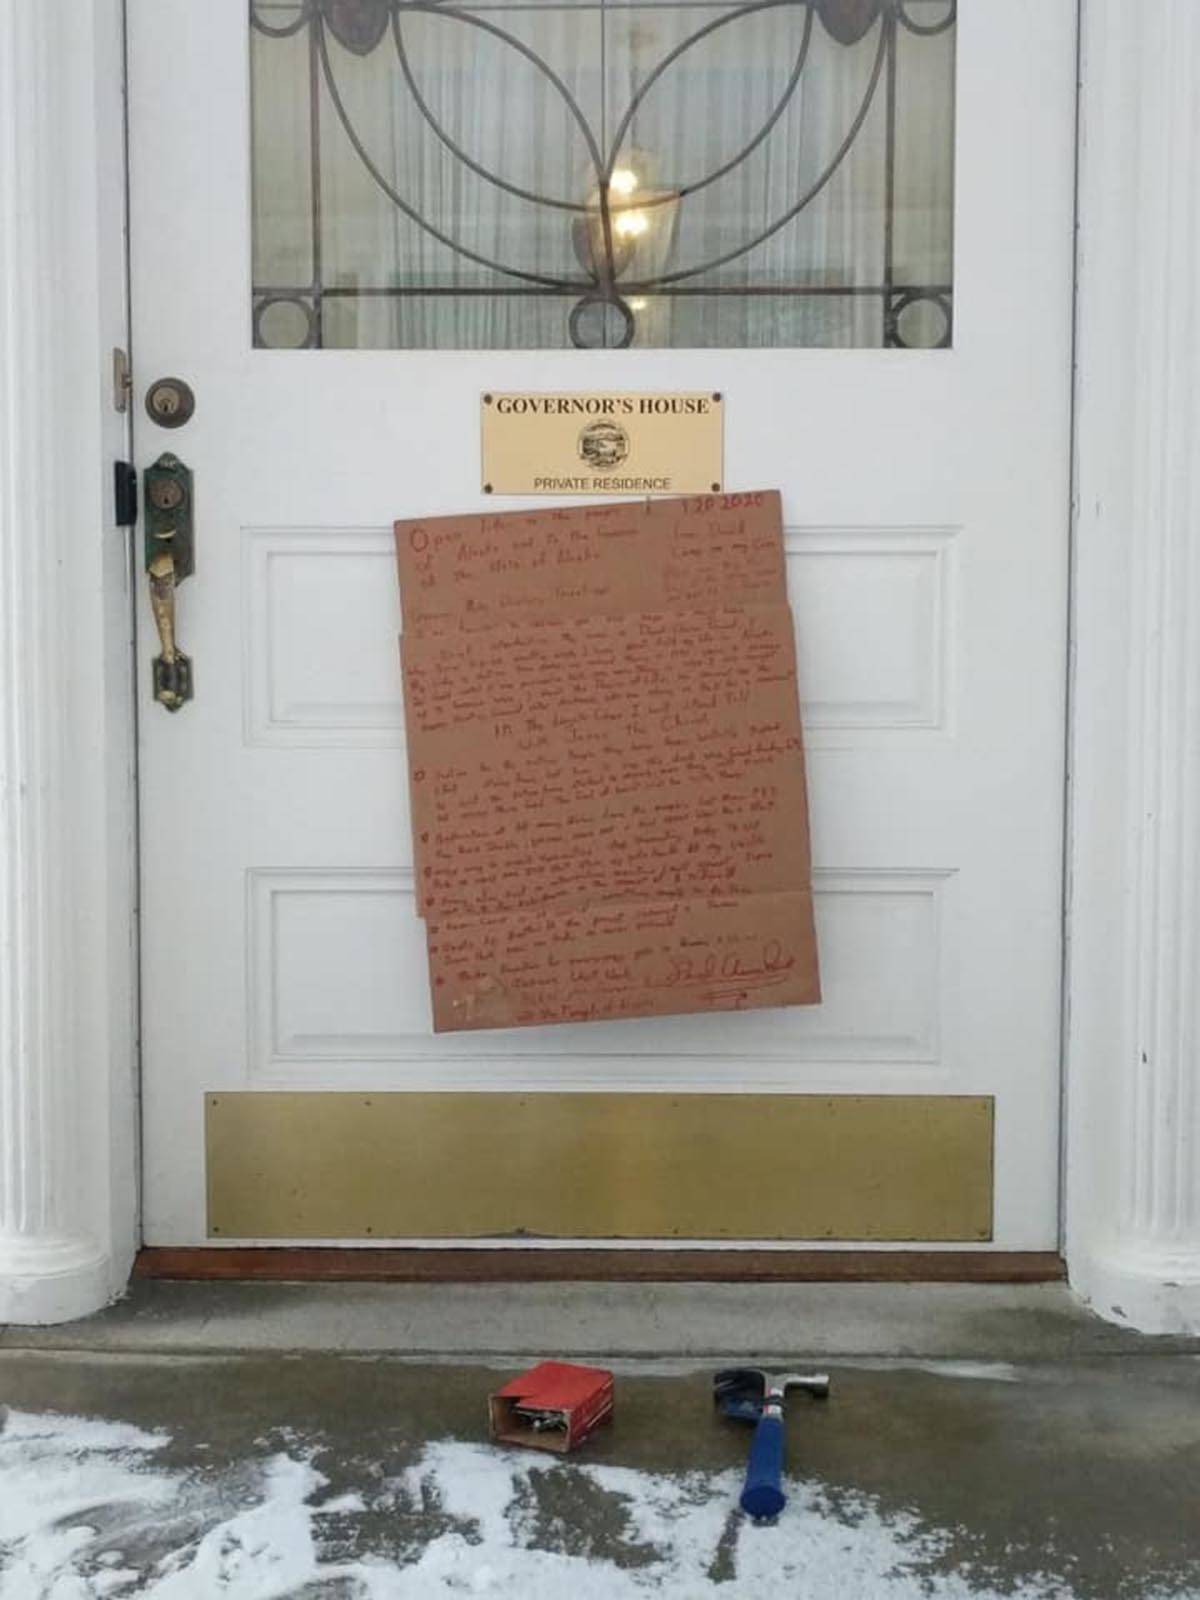 The sign nailed to the Governor’s Mansion by a man on Jan. 20, 2020. (Courtesy Photo)